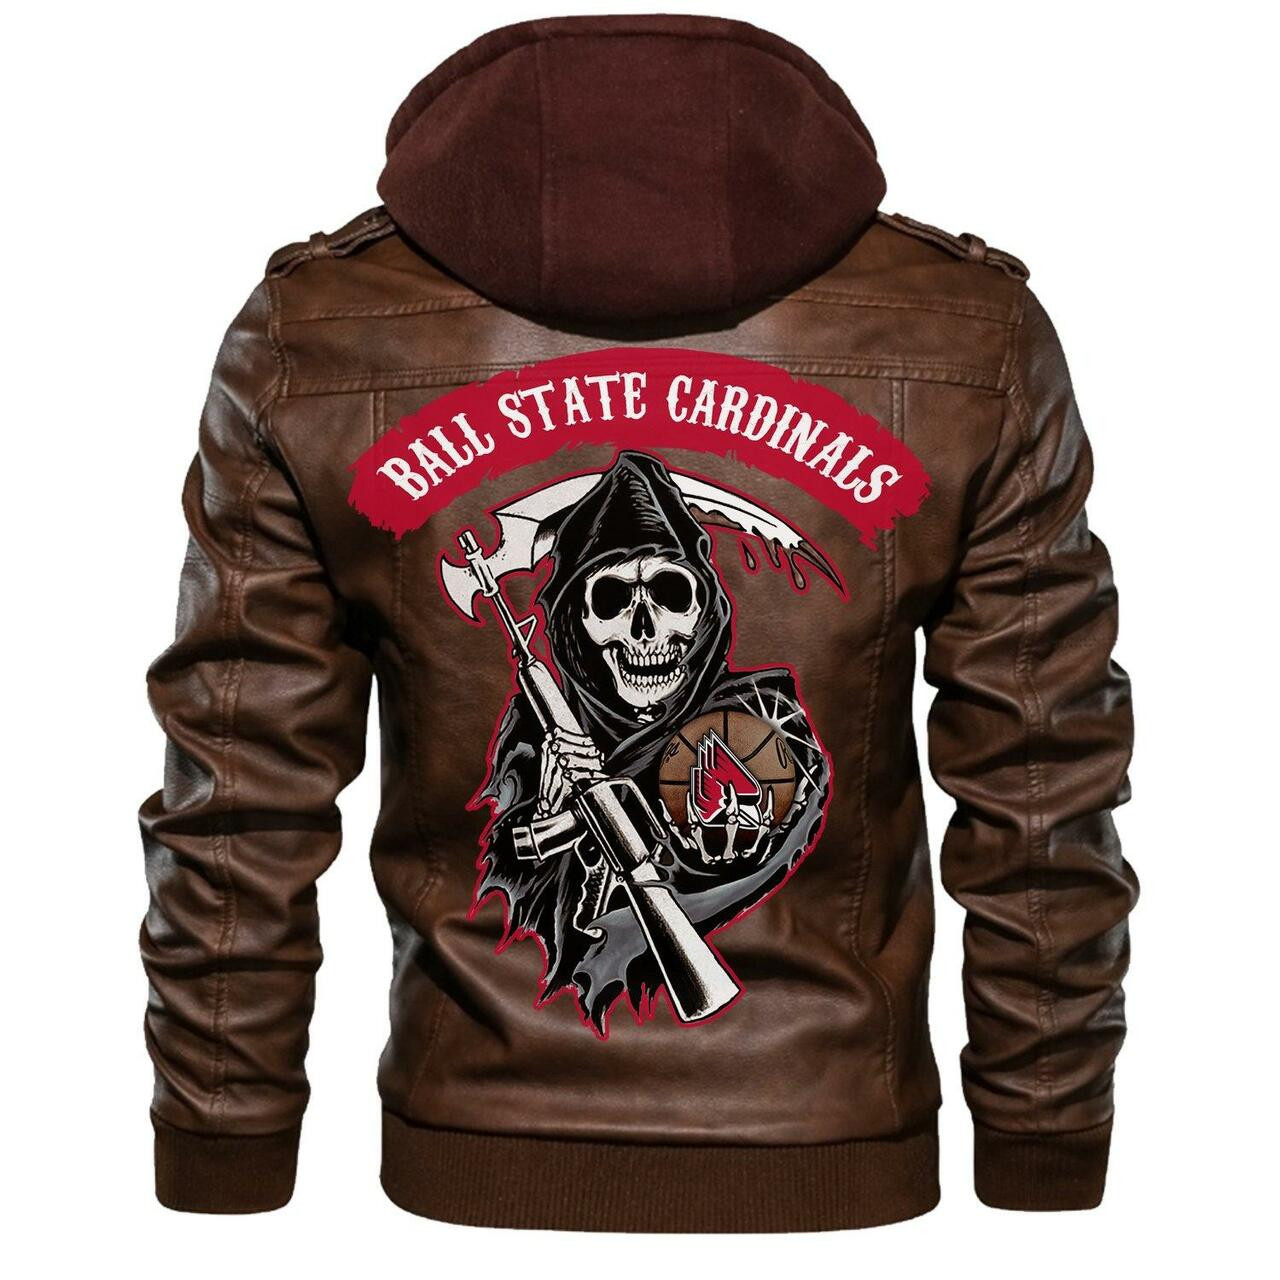 Check out and find the right leather jacket below 45